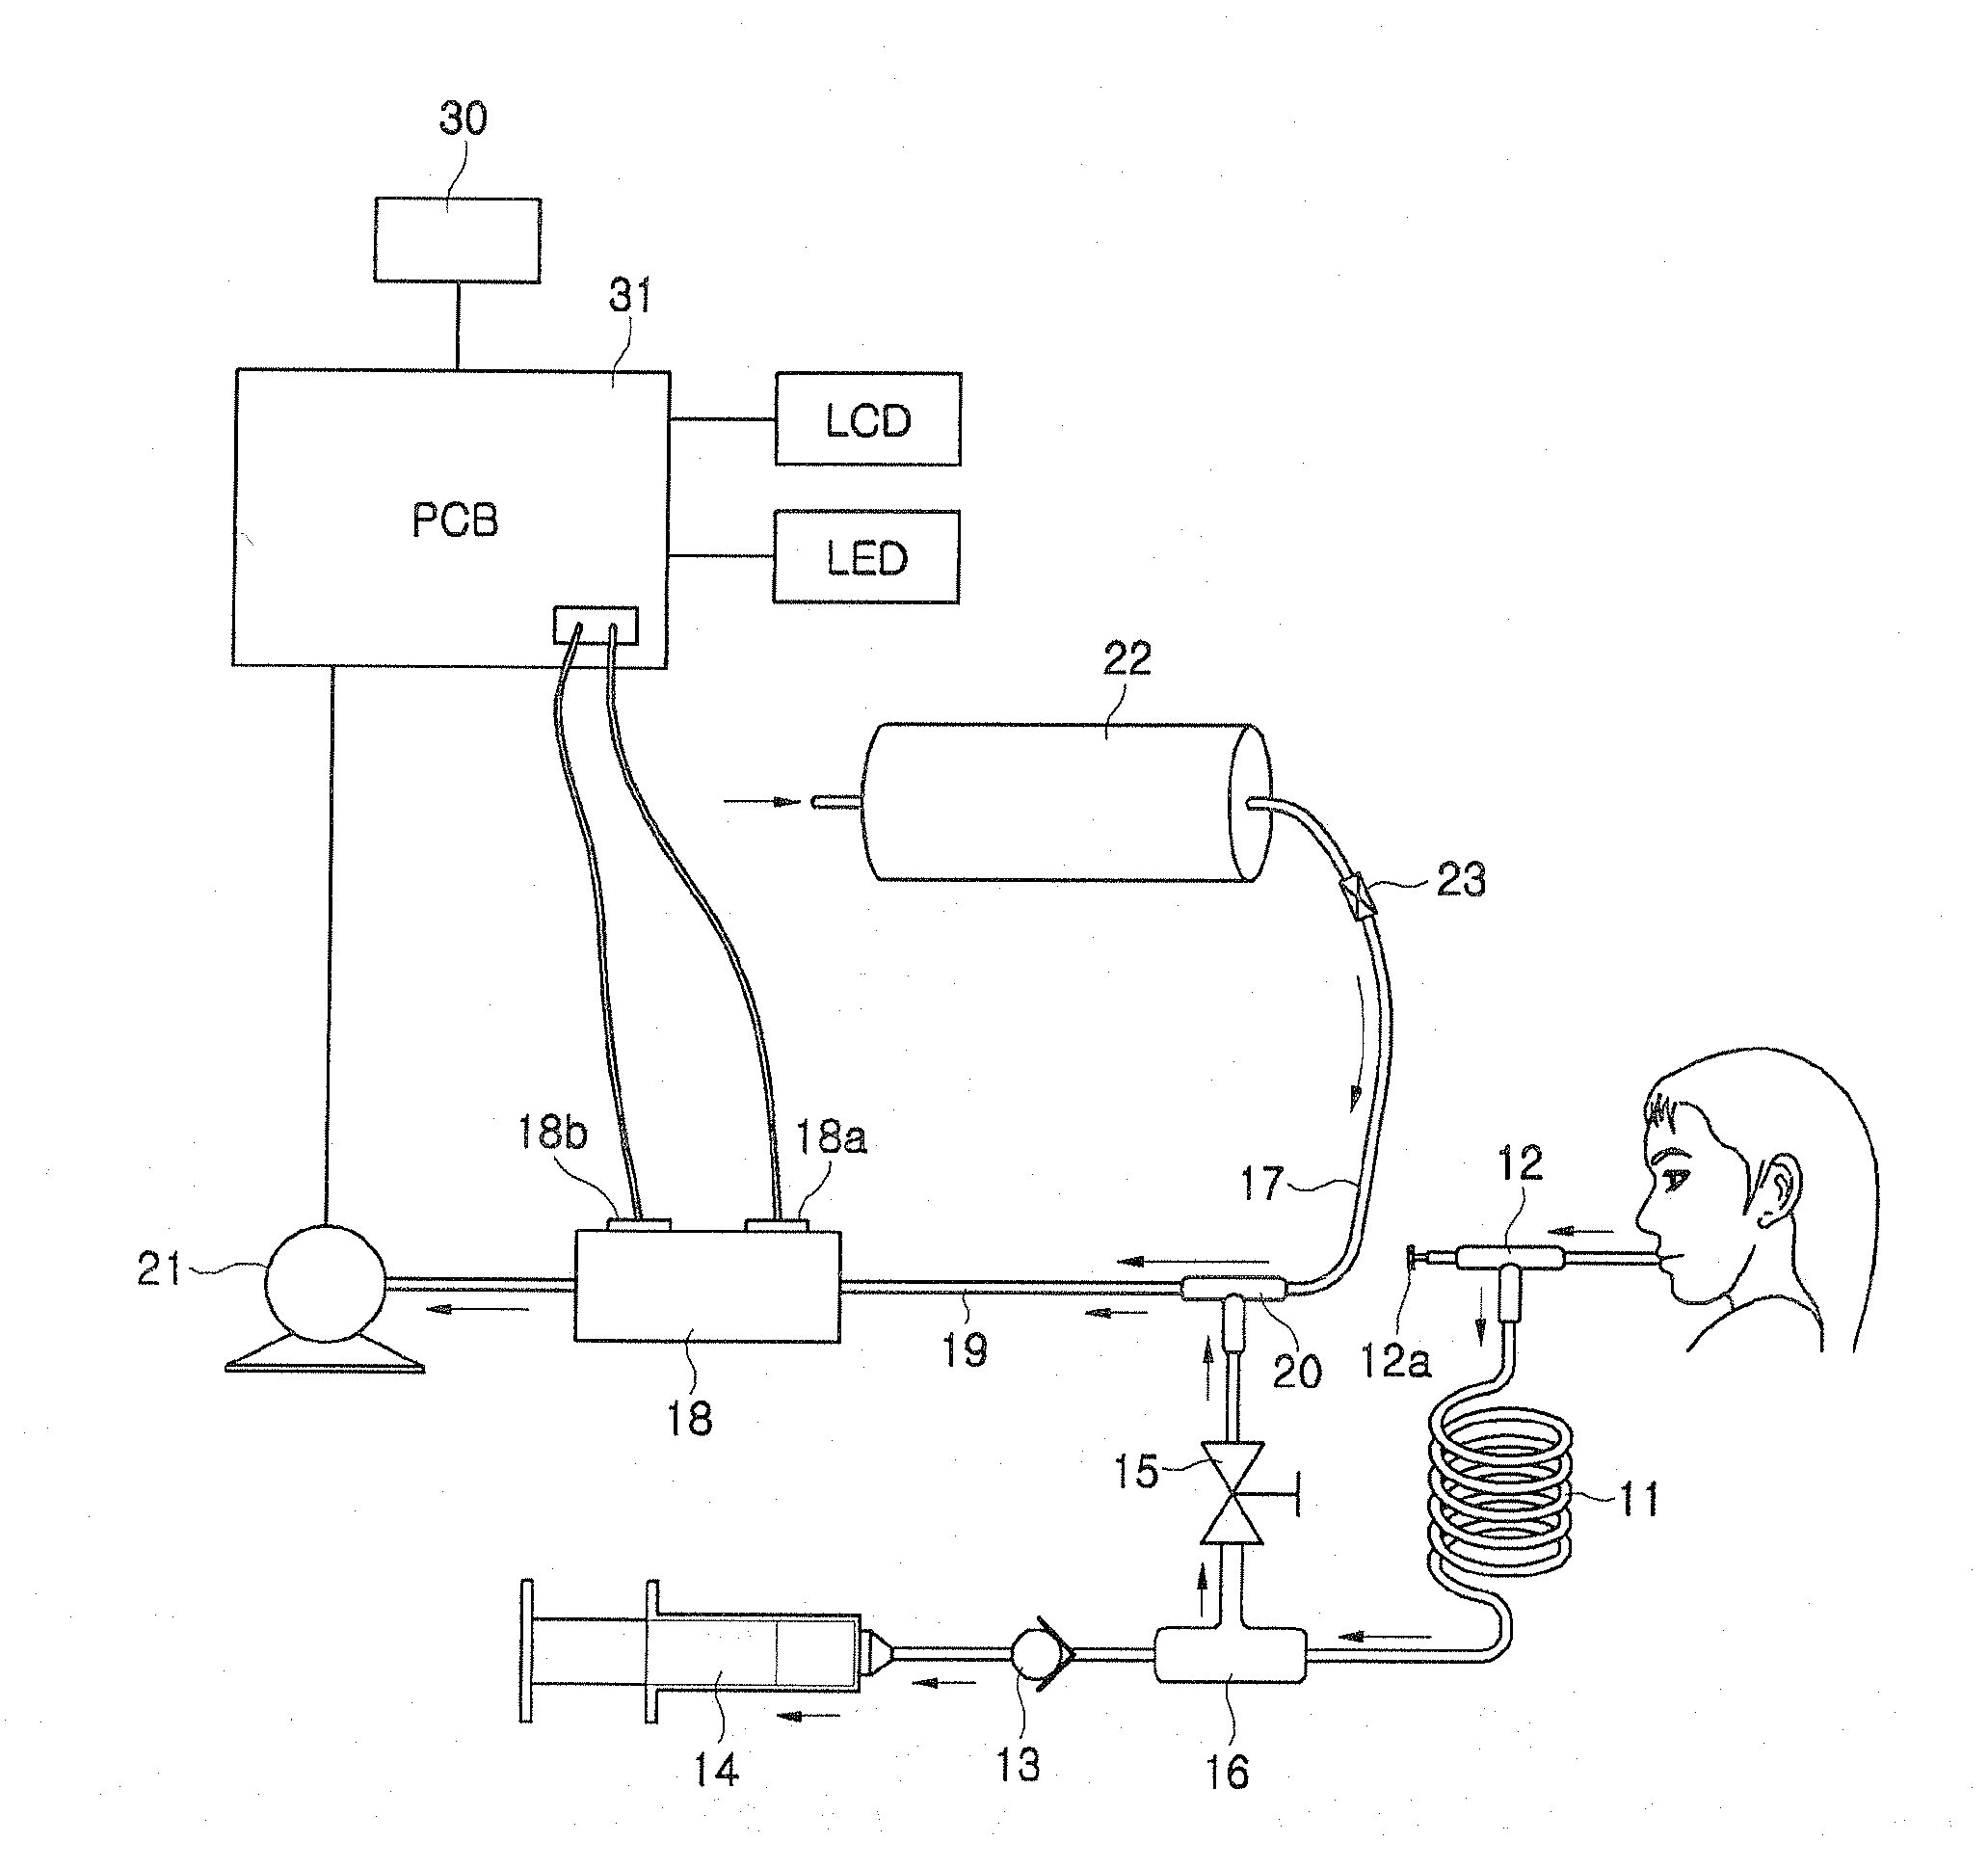 Apparatus and method of analyzing constituents of gas in oral cavity and alveolar gas